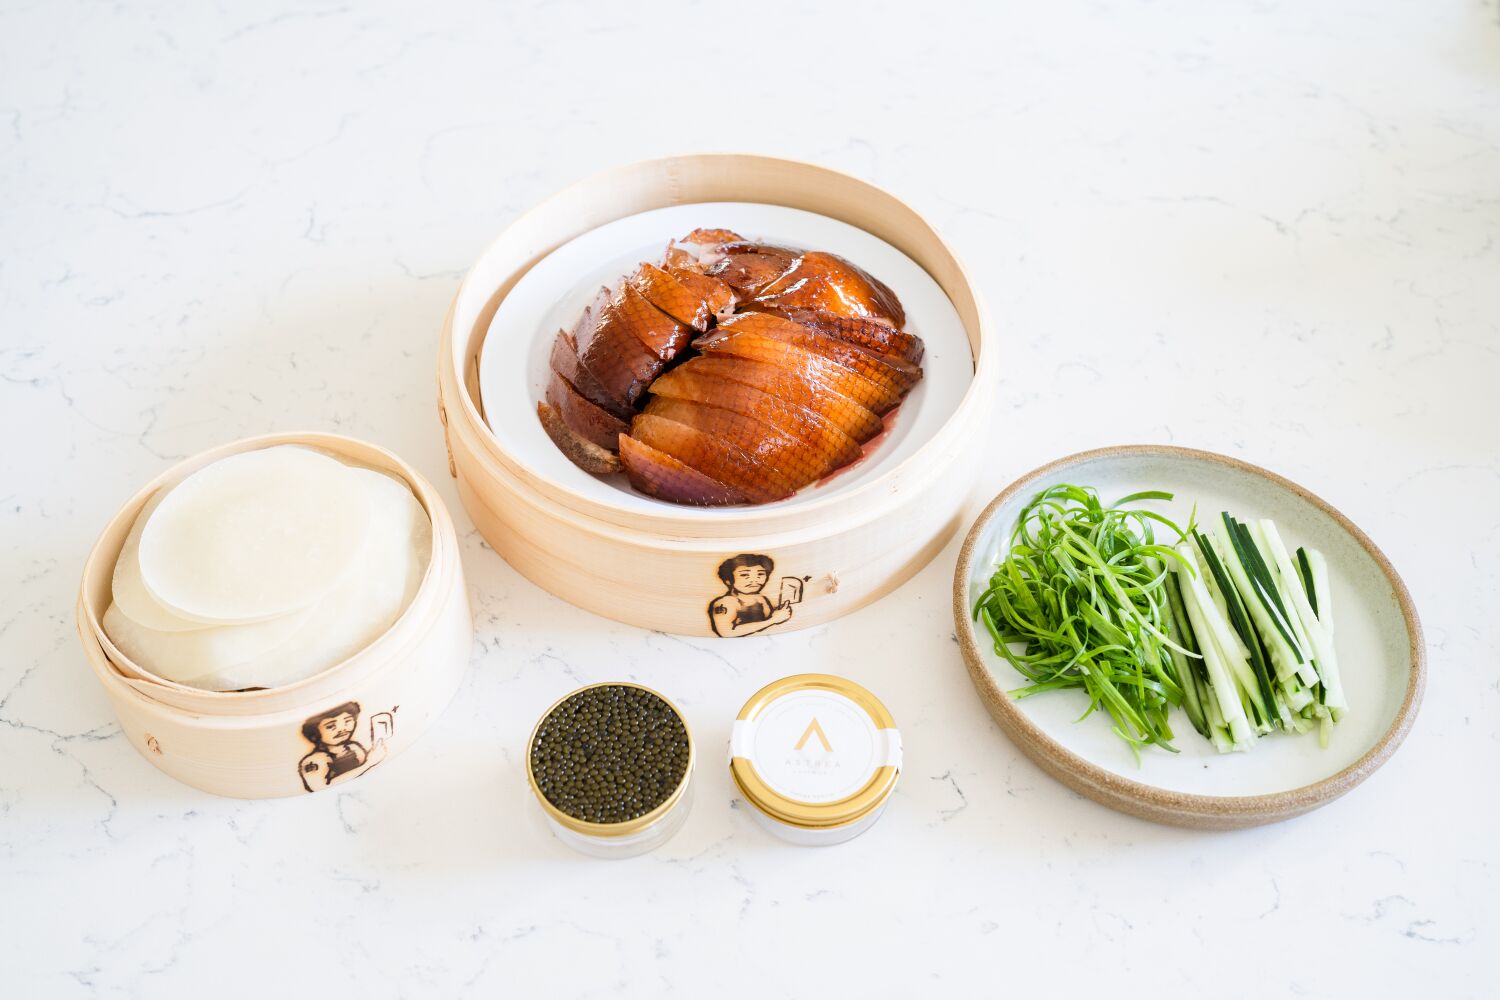 In Sherman Oaks' future: this Cantonese barbecue specialist's dry-aged duck with caviar